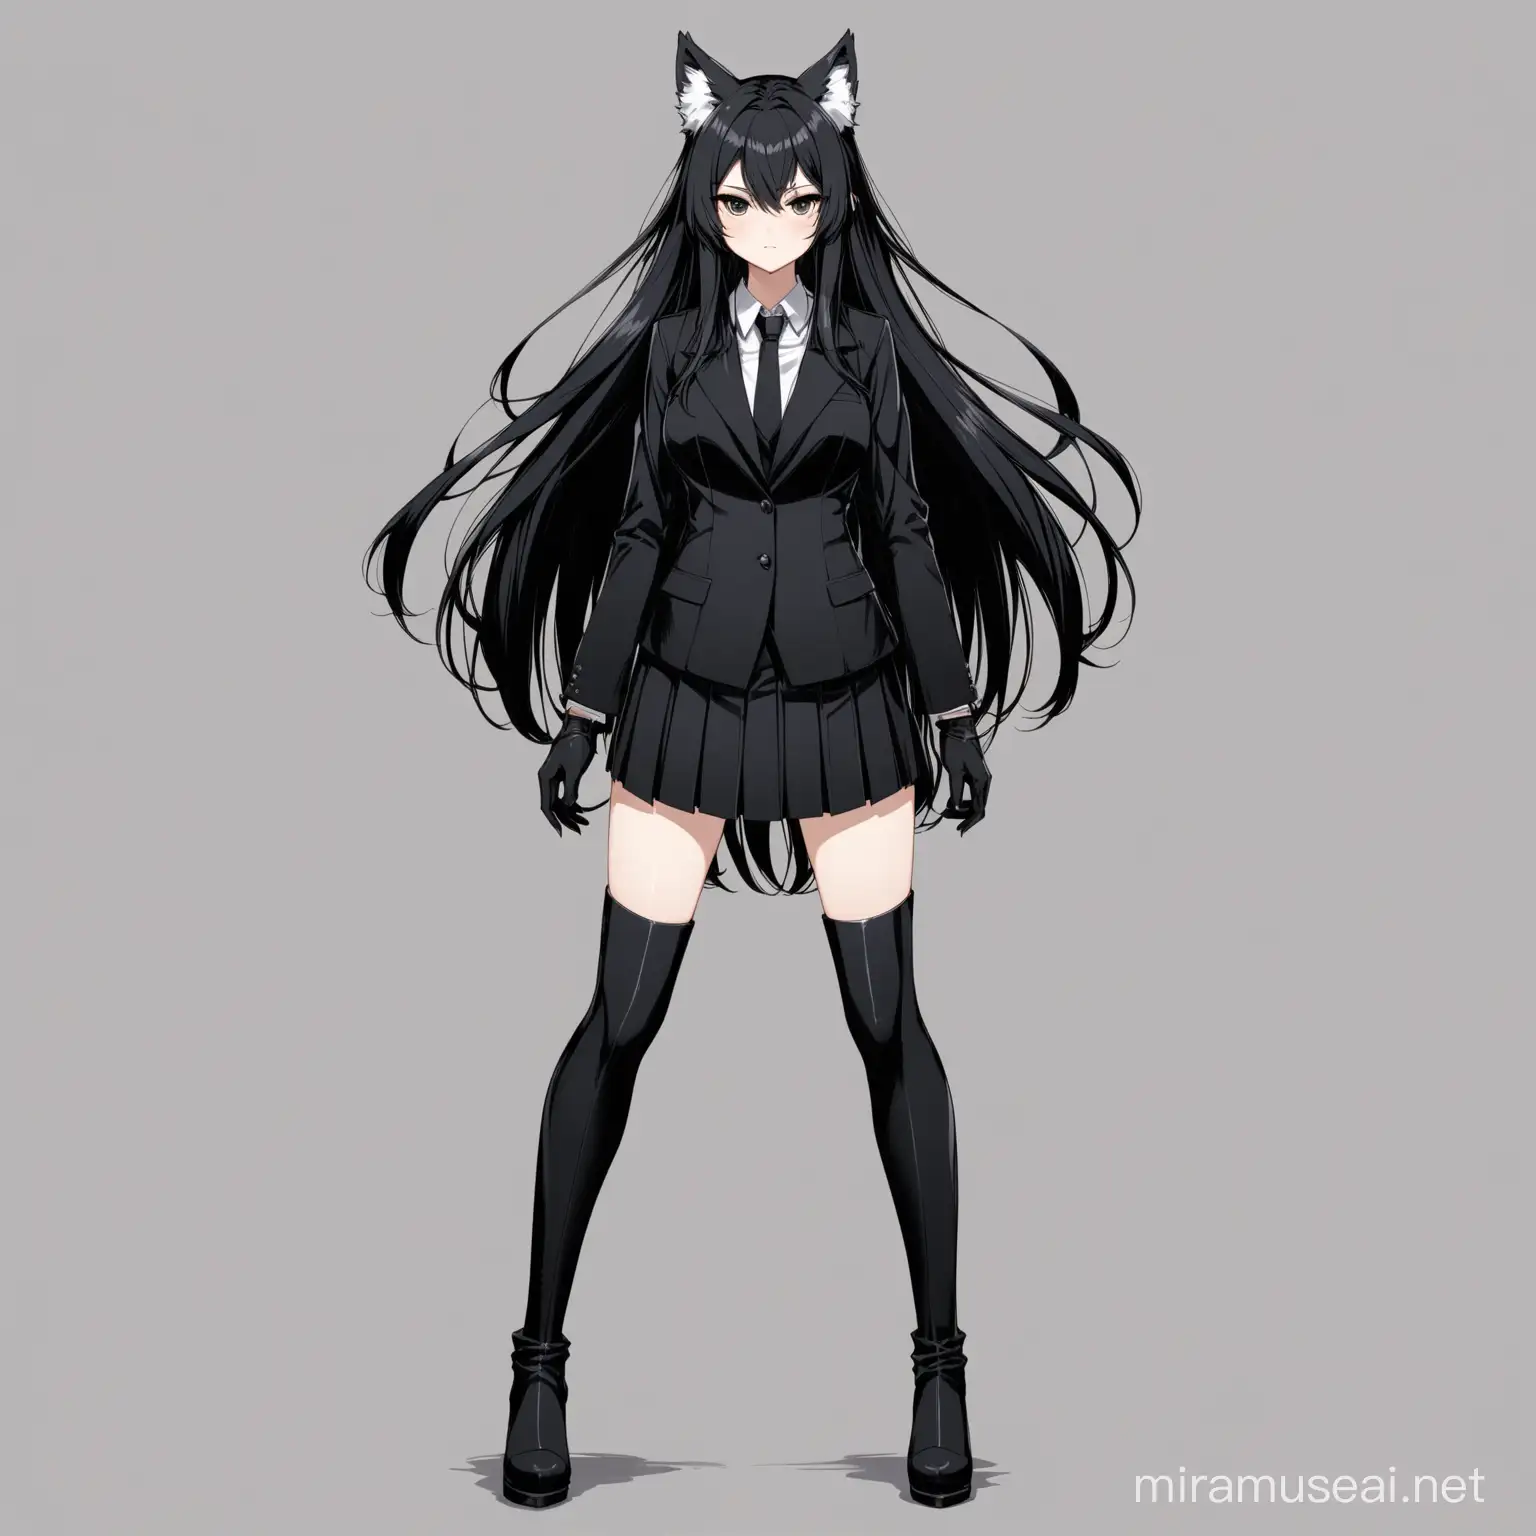 Tall Girl in Black Suit with Wolf Features